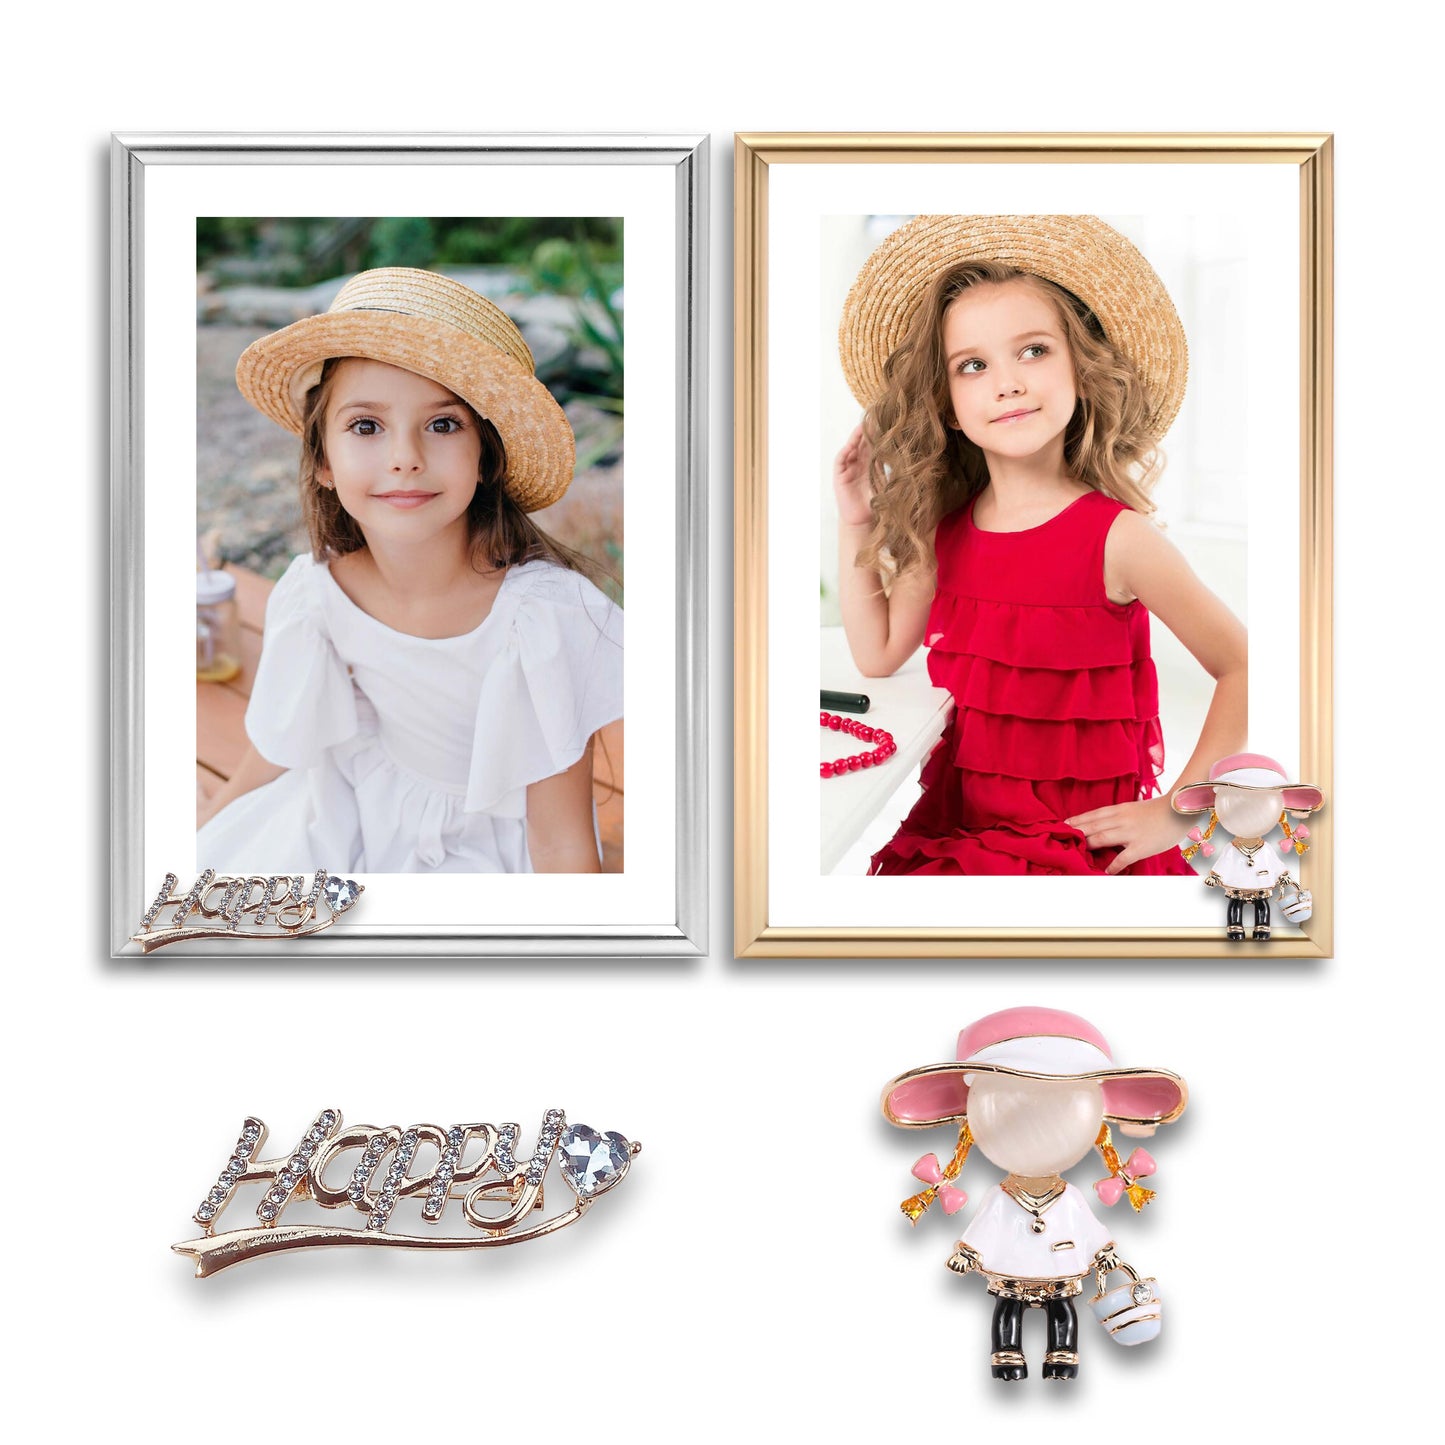 Dotride 5x7 Metal Picture Frames with Glass Panel 2 Pack, Tabletop Photo Frame with Detachable Happy and Little Girl Ornaments for Daily Family Photos, Gold and Silver